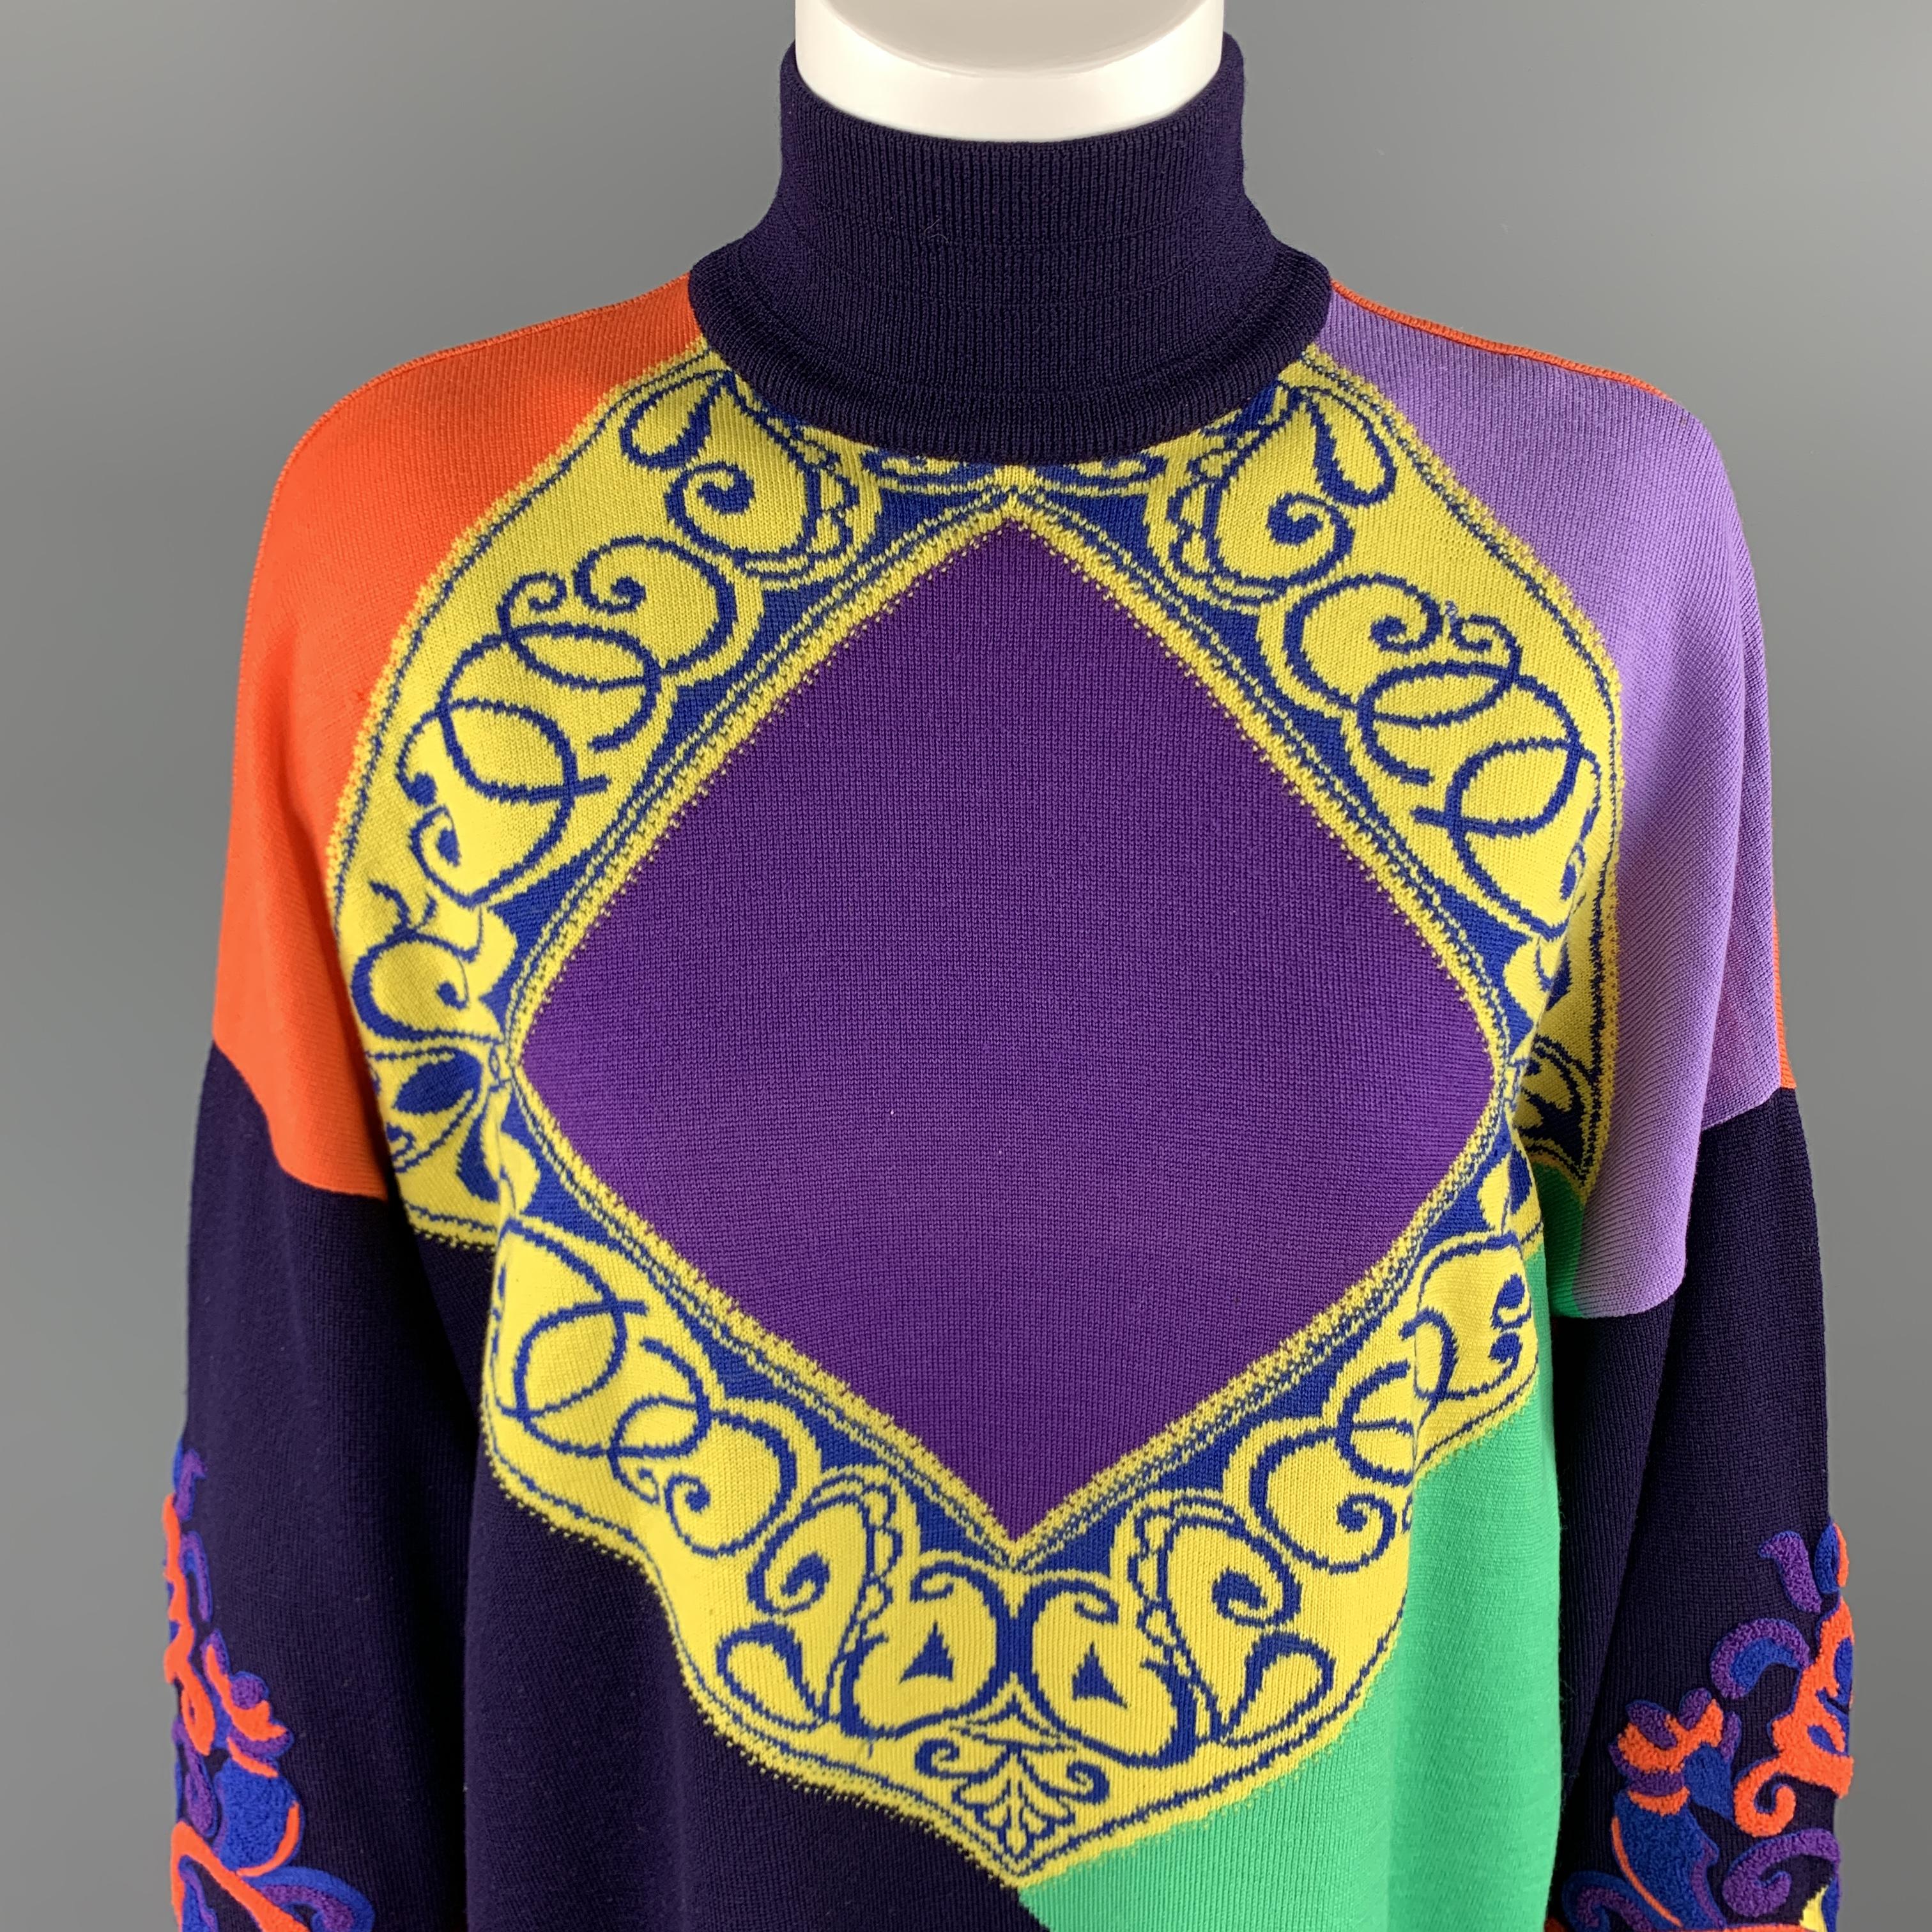 Vintage 1980's GIANNI VERSACE pullover sweater comes in eggplant, purple, yellow, orange, and green baroque color block print wool knit with a high mock neck, batwing sleeves with textured overlay, and geometric print back. Minor wear. As-is. Made